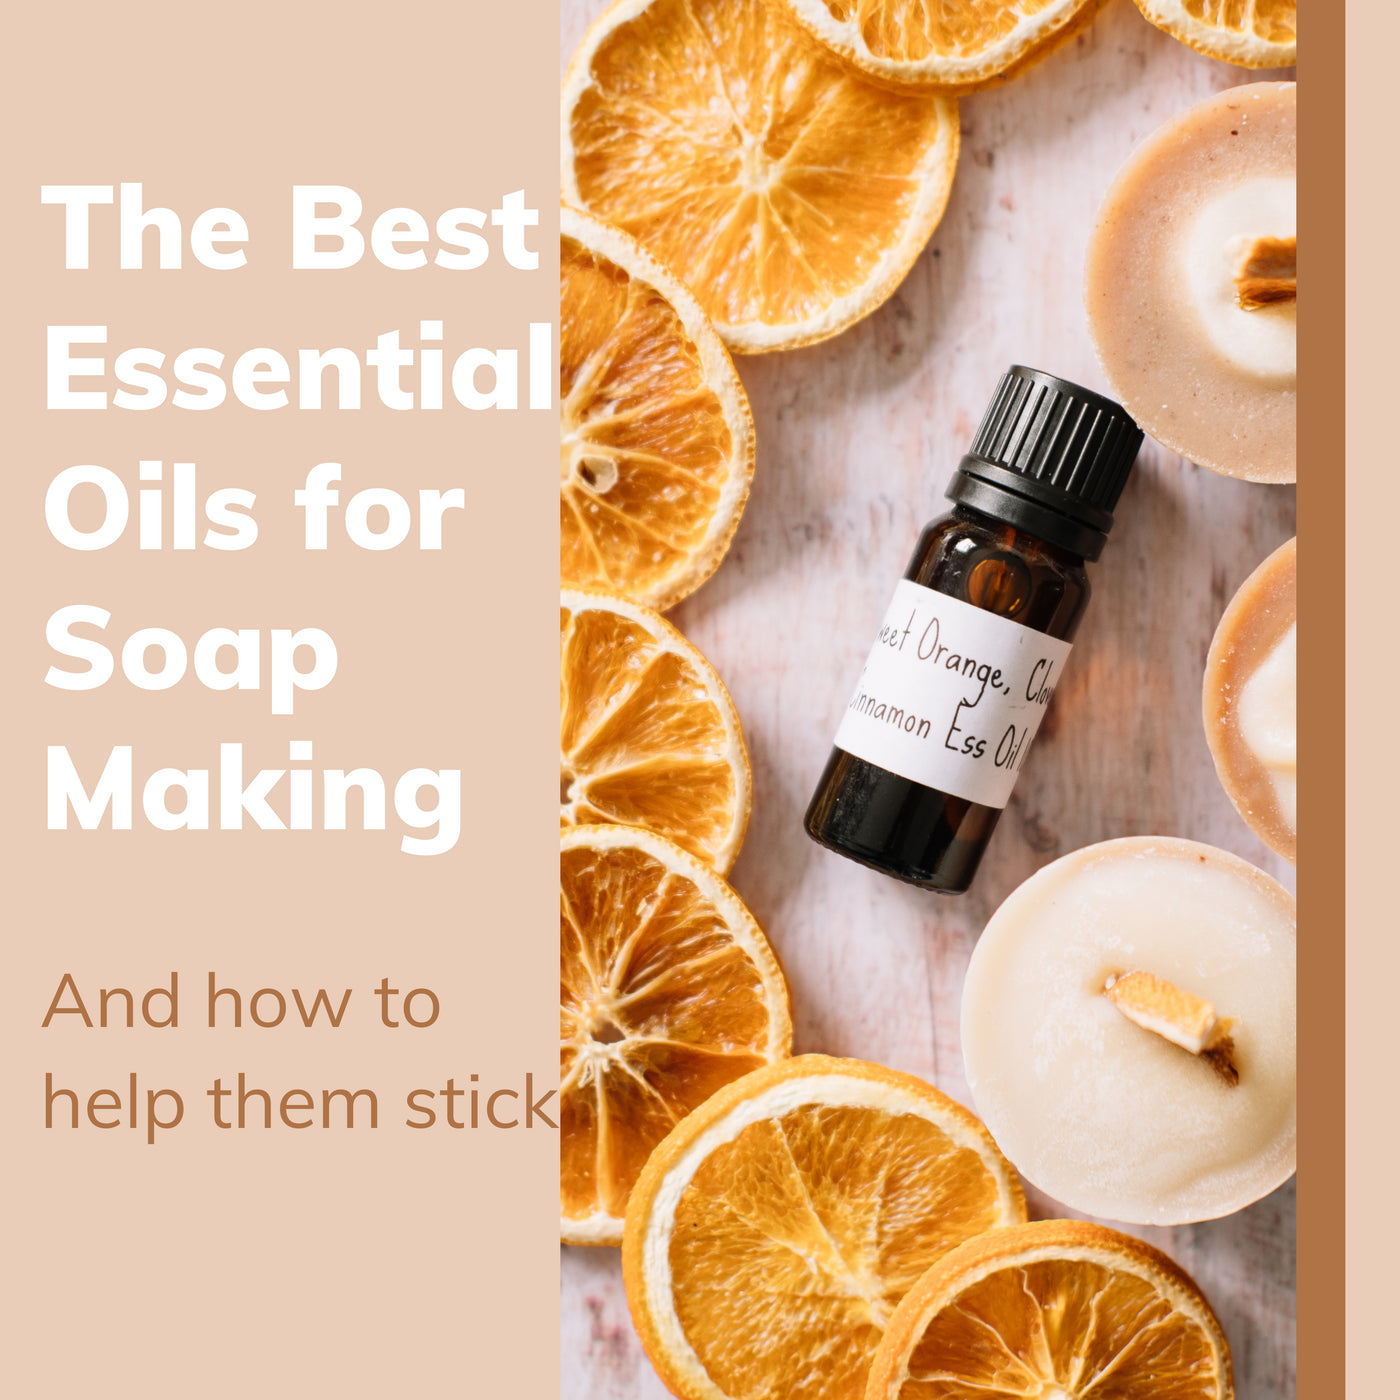 How to Blend Essential Oils Safely - Soap Queen